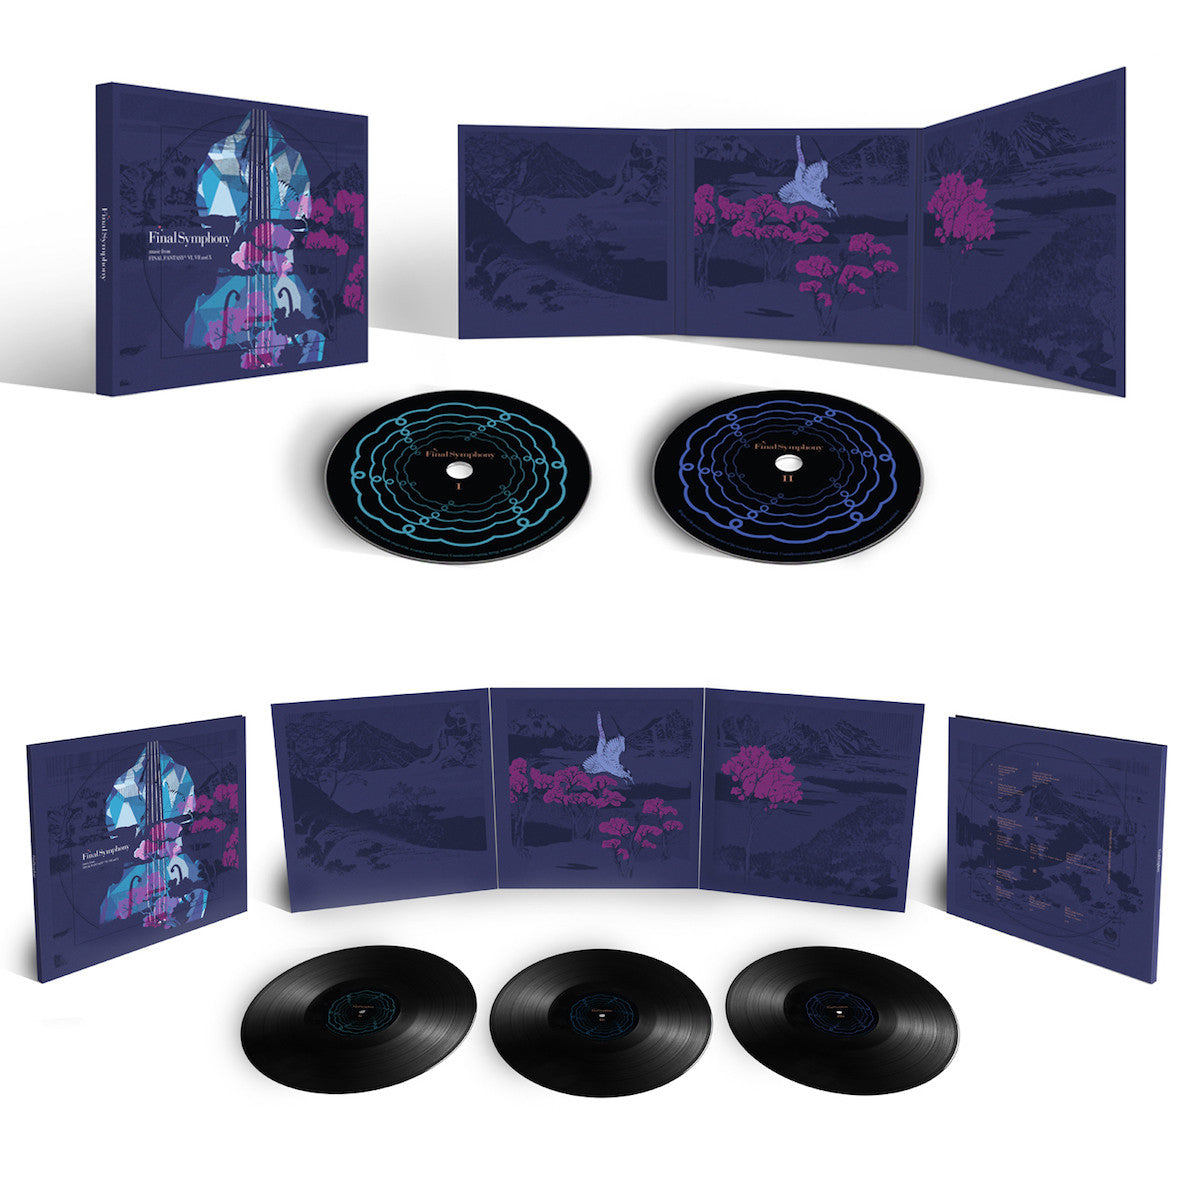 Final Symphony on CD and vinyl featuring the music of Nobuo Uematsu from Final Fantasy